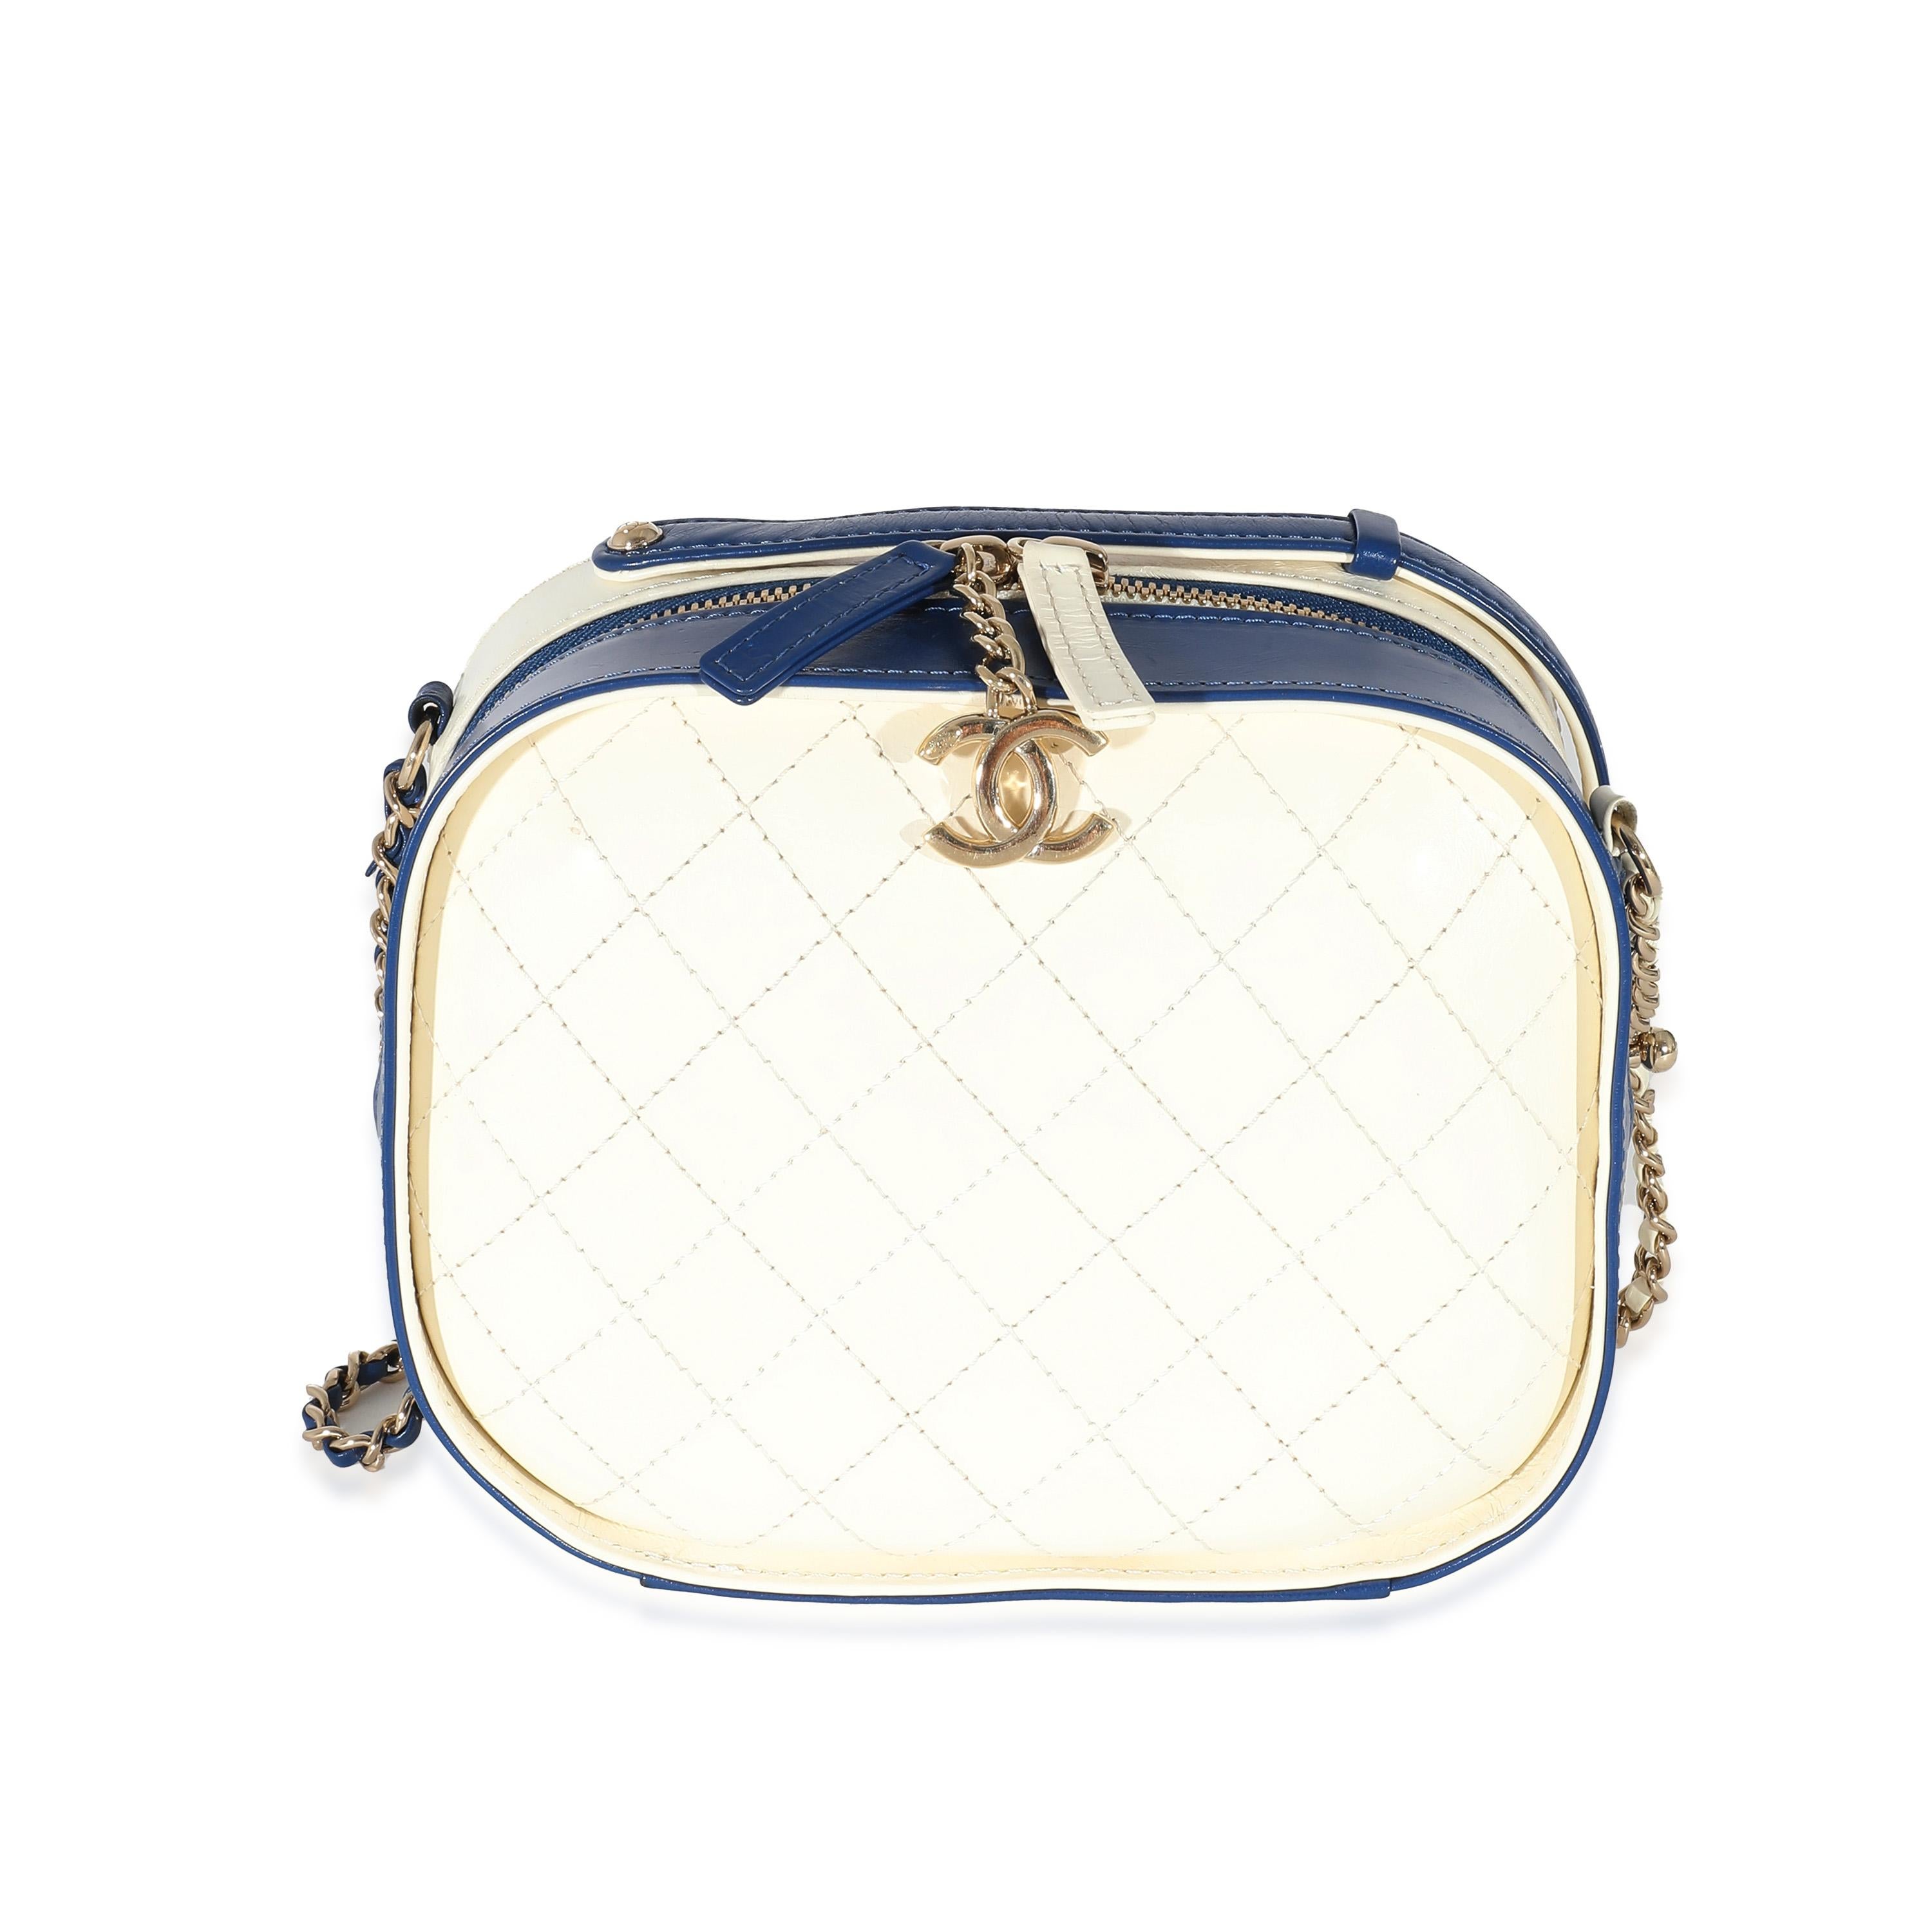 Chanel Navy White Crumpled Calfskin Vanity Case In Excellent Condition For Sale In New York, NY